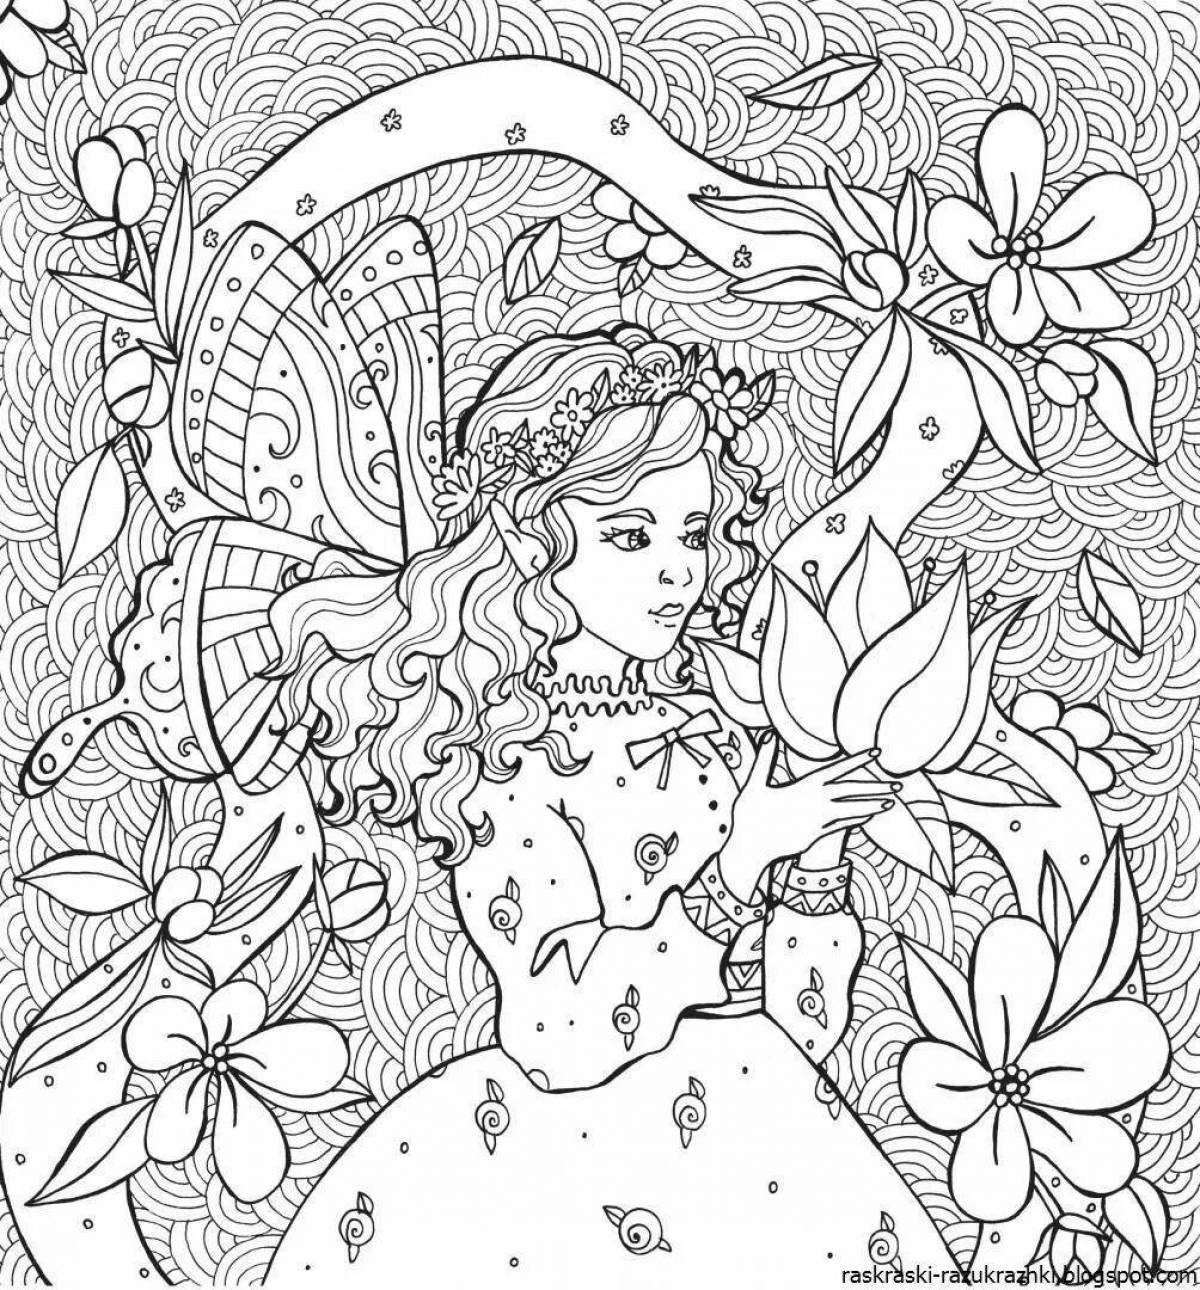 A fun magical coloring book for kids